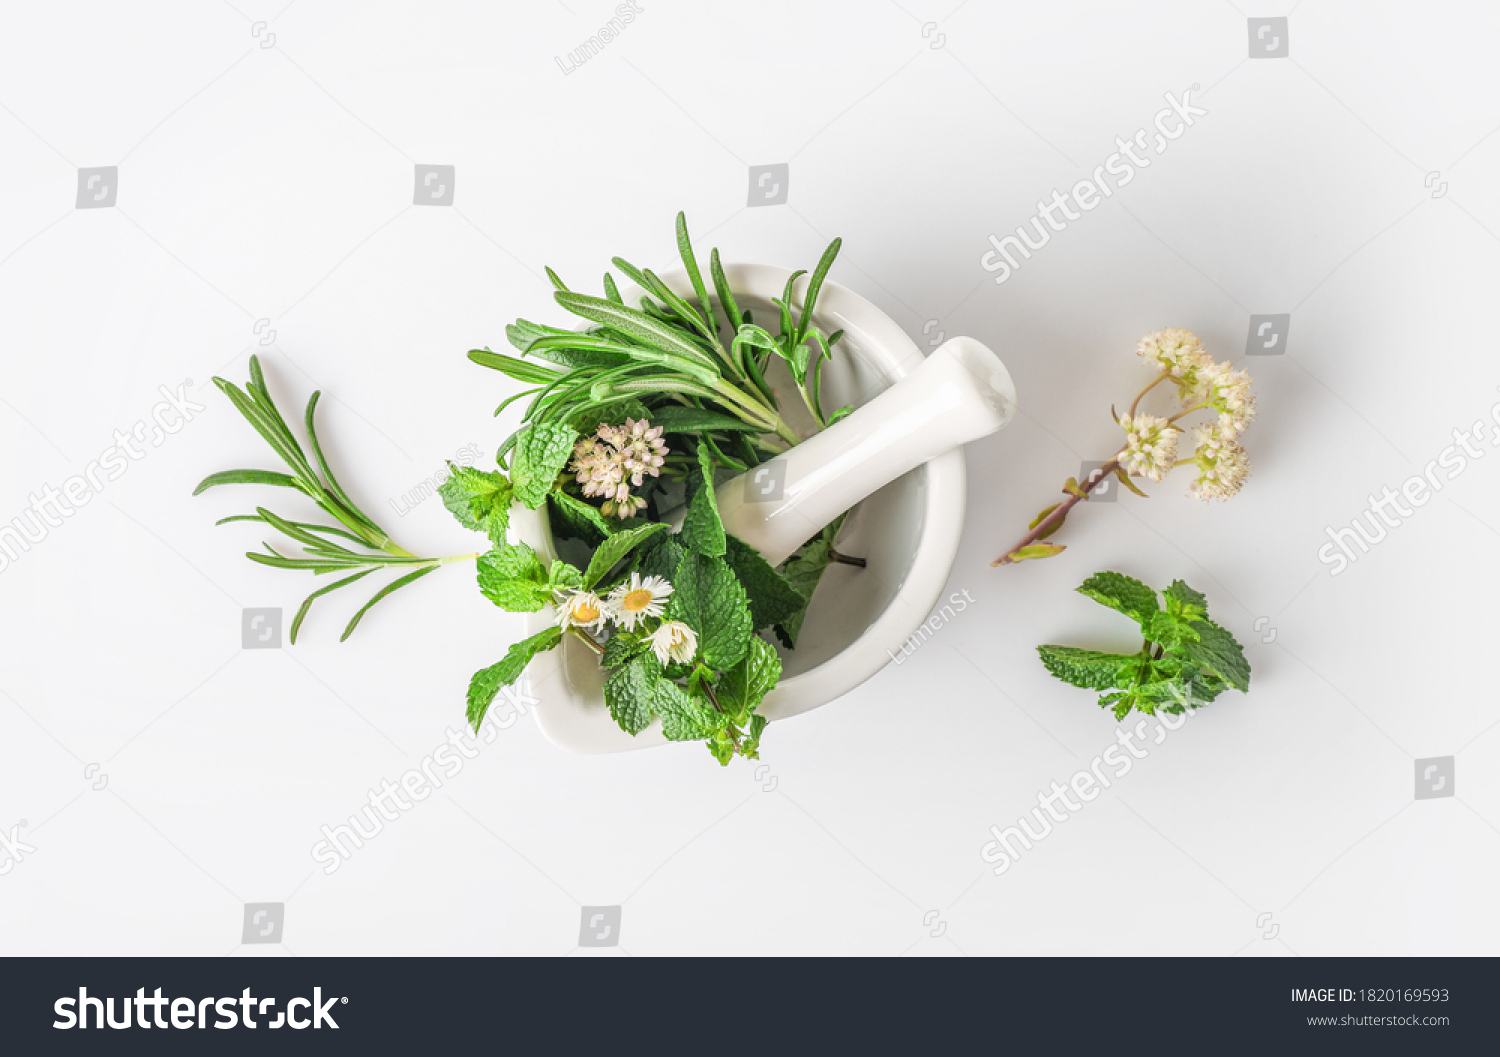 Medicinal herbs in mortar with pestle isolated on white background. Top view. Herbal medicine concept. #1820169593